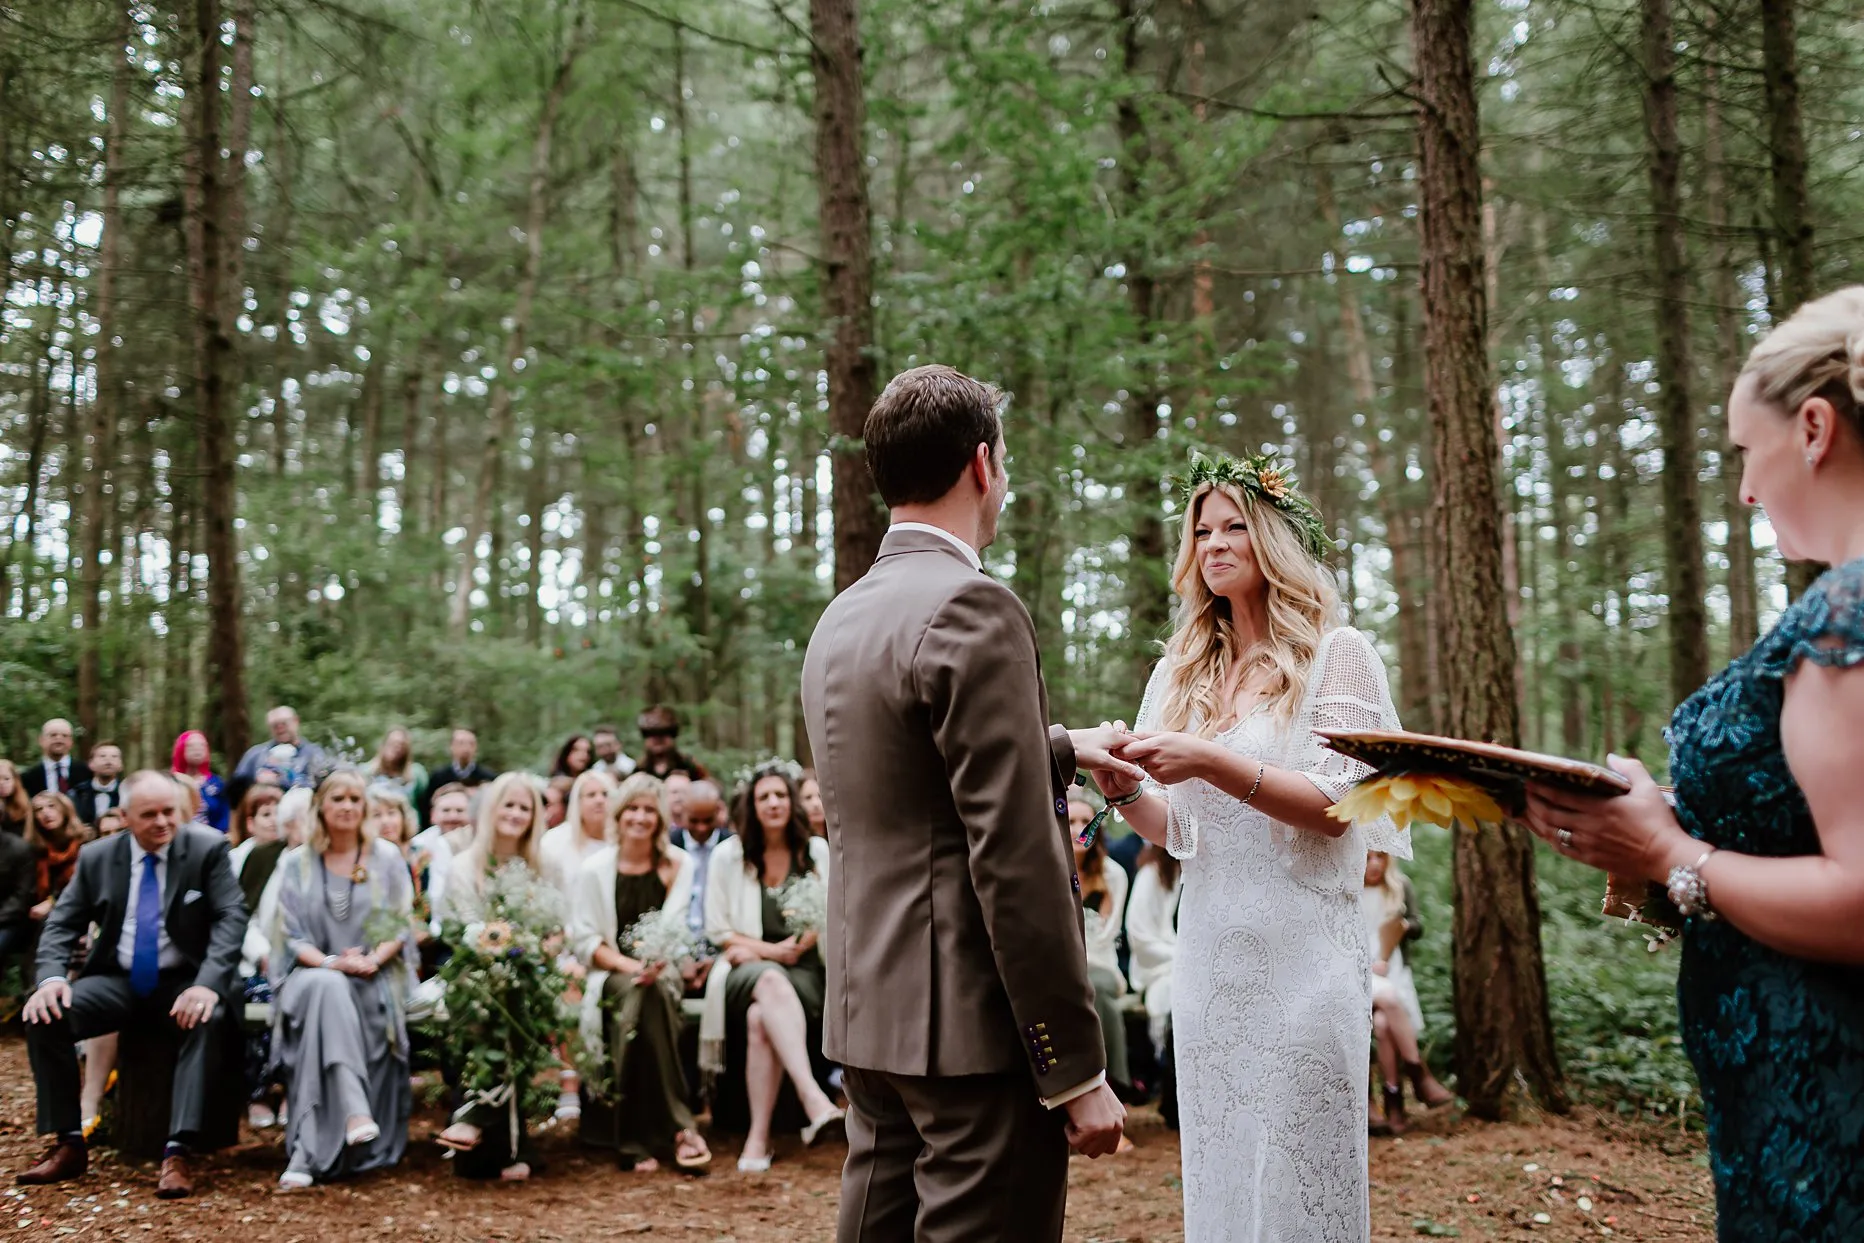 Bride and groom exchanging rings during their wedding ceremony in the woods. They are surrounded by trees and wedding guests are seated in the background watching them and smiling.